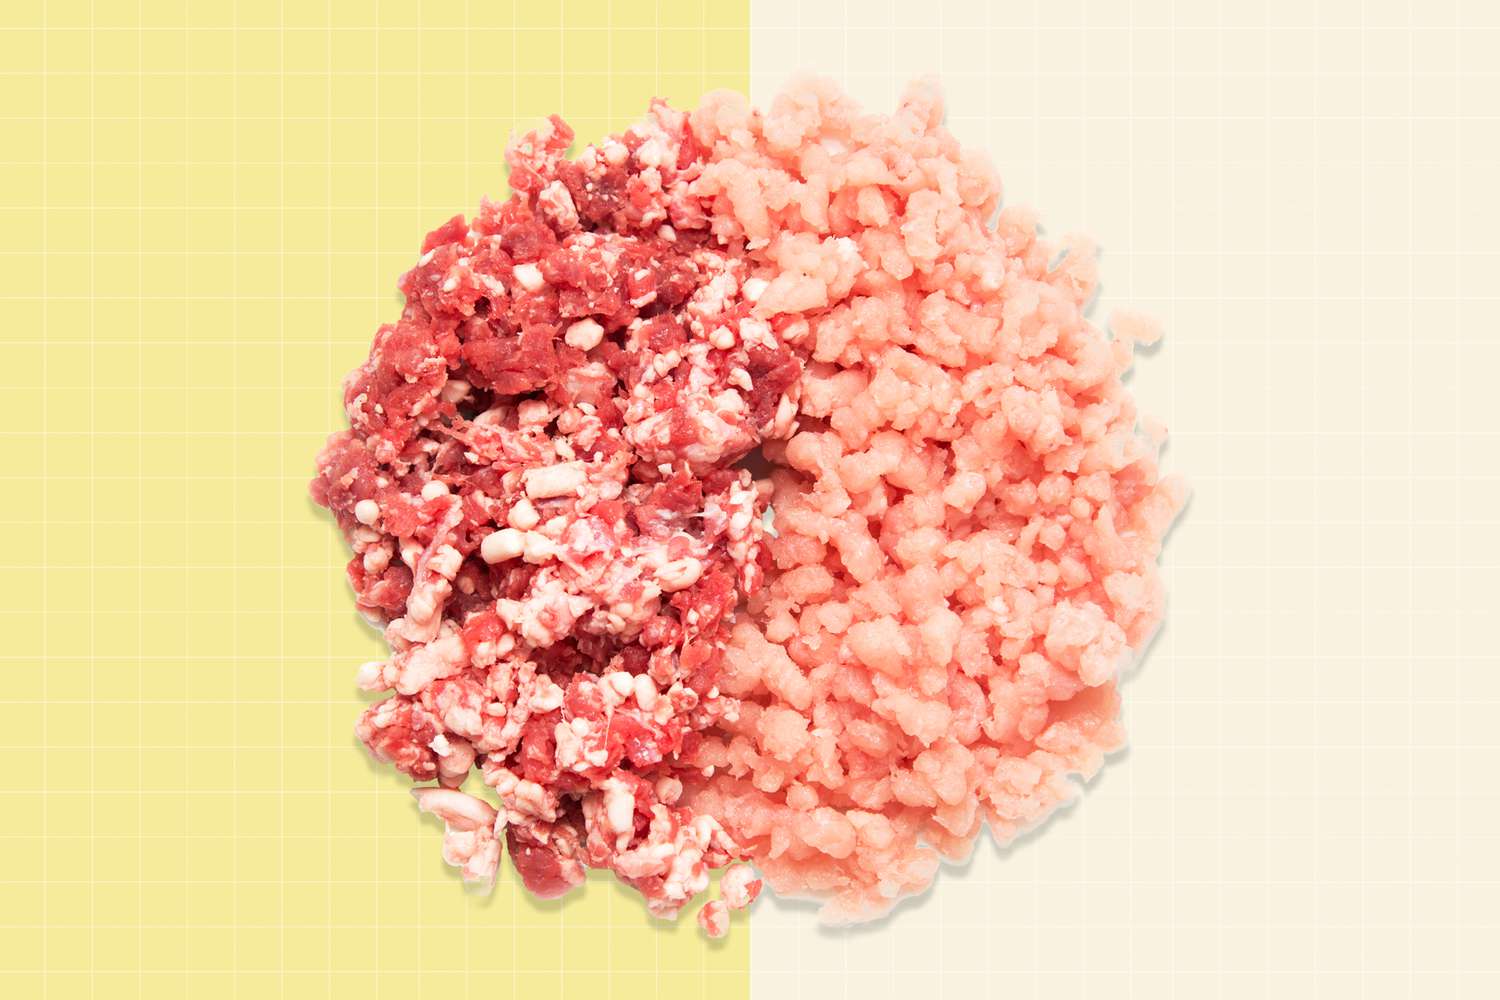 Ground Turkey vs. Ground Beef: Nutrition Facts and More